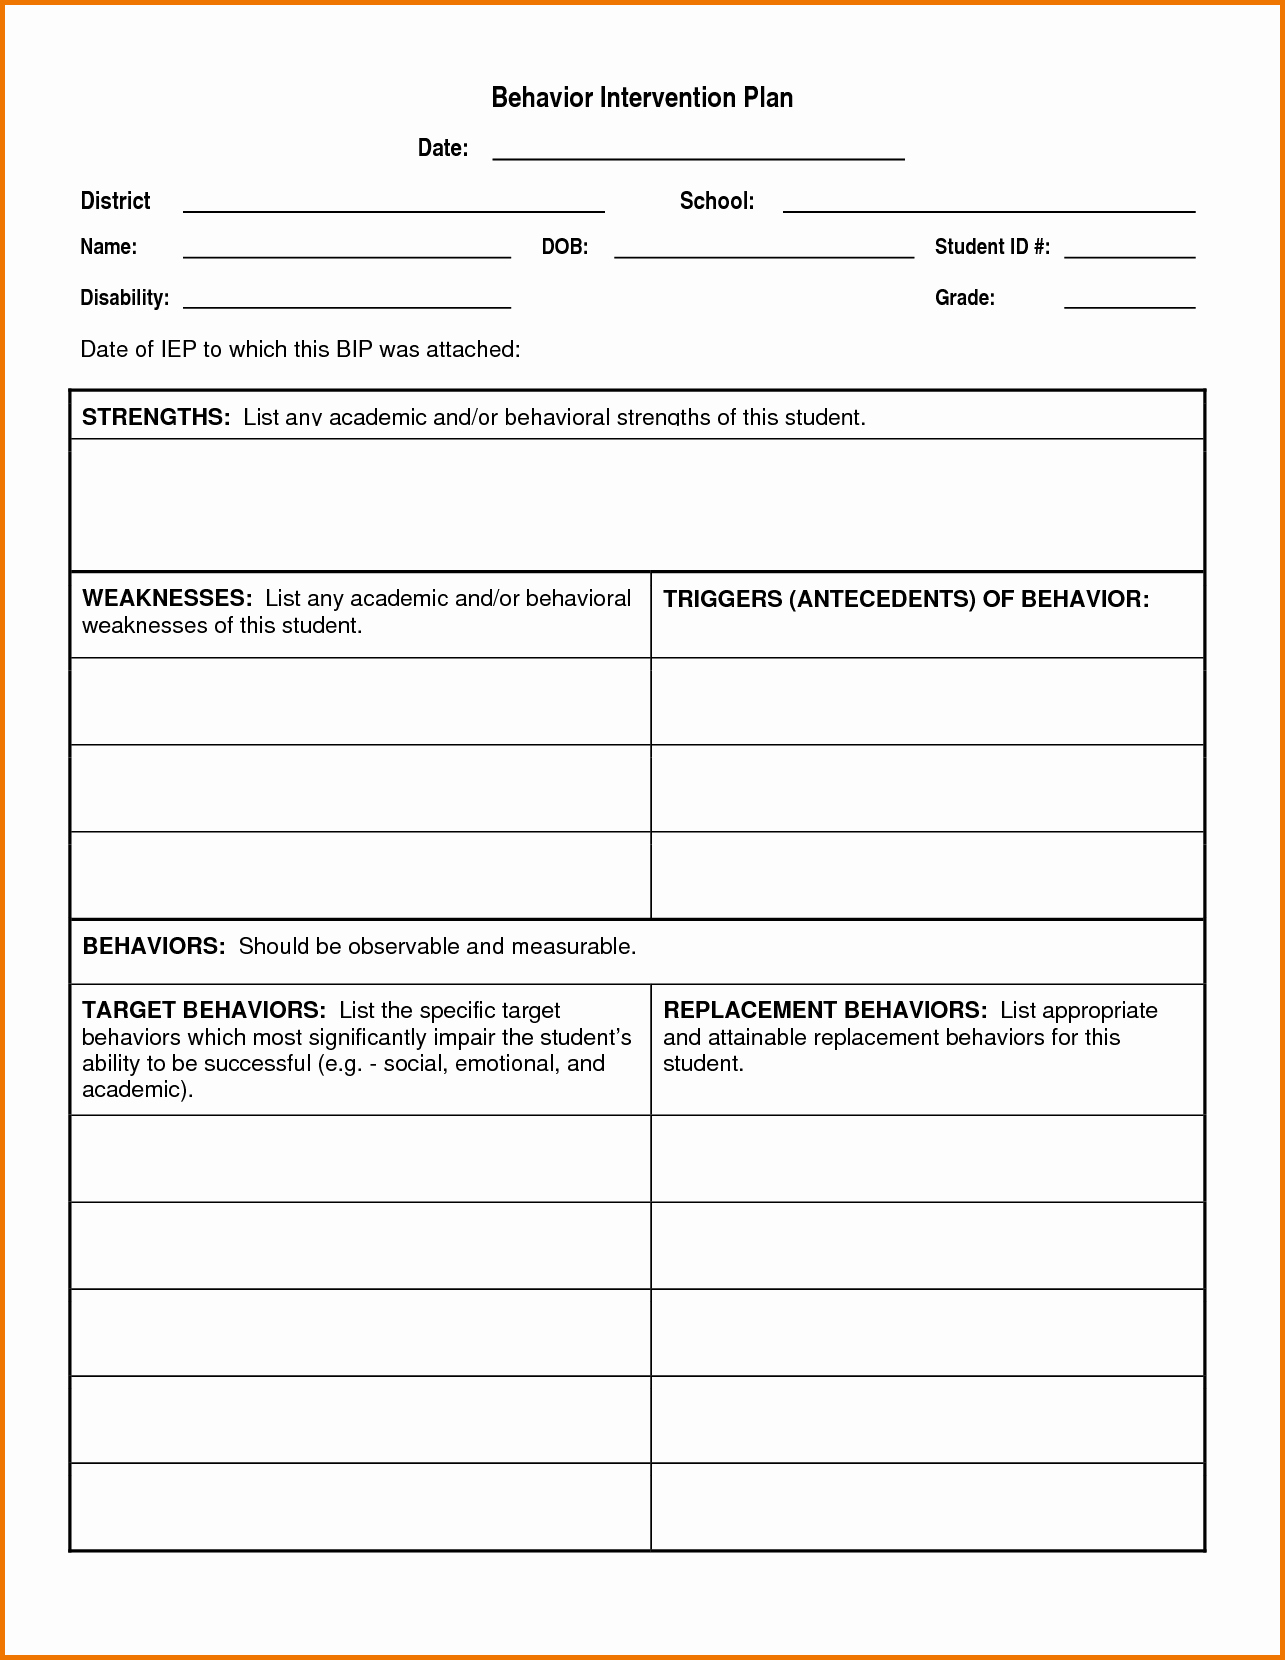 Behavior Intervention Plan Template Doc Awesome Impressive School Care Plan Template Tinypetition